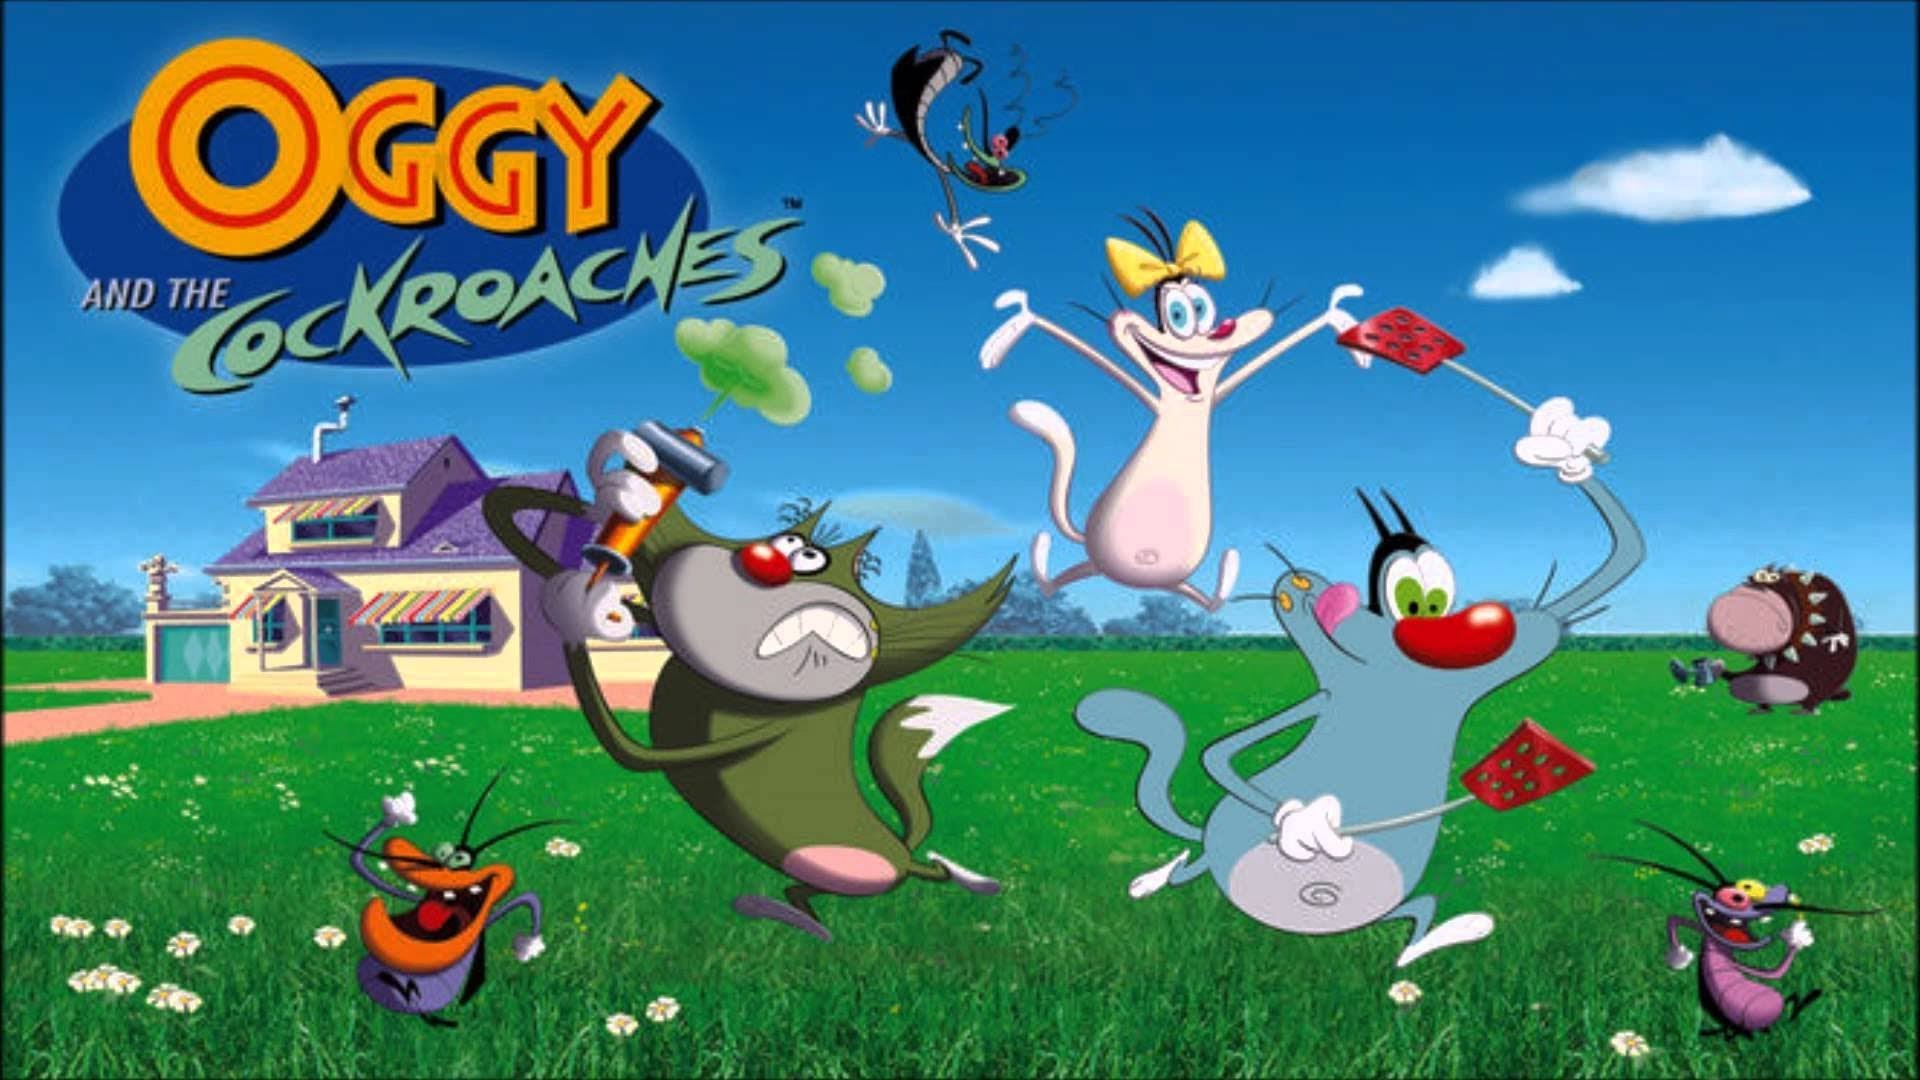 Oggy and the Cockroaches (1997)